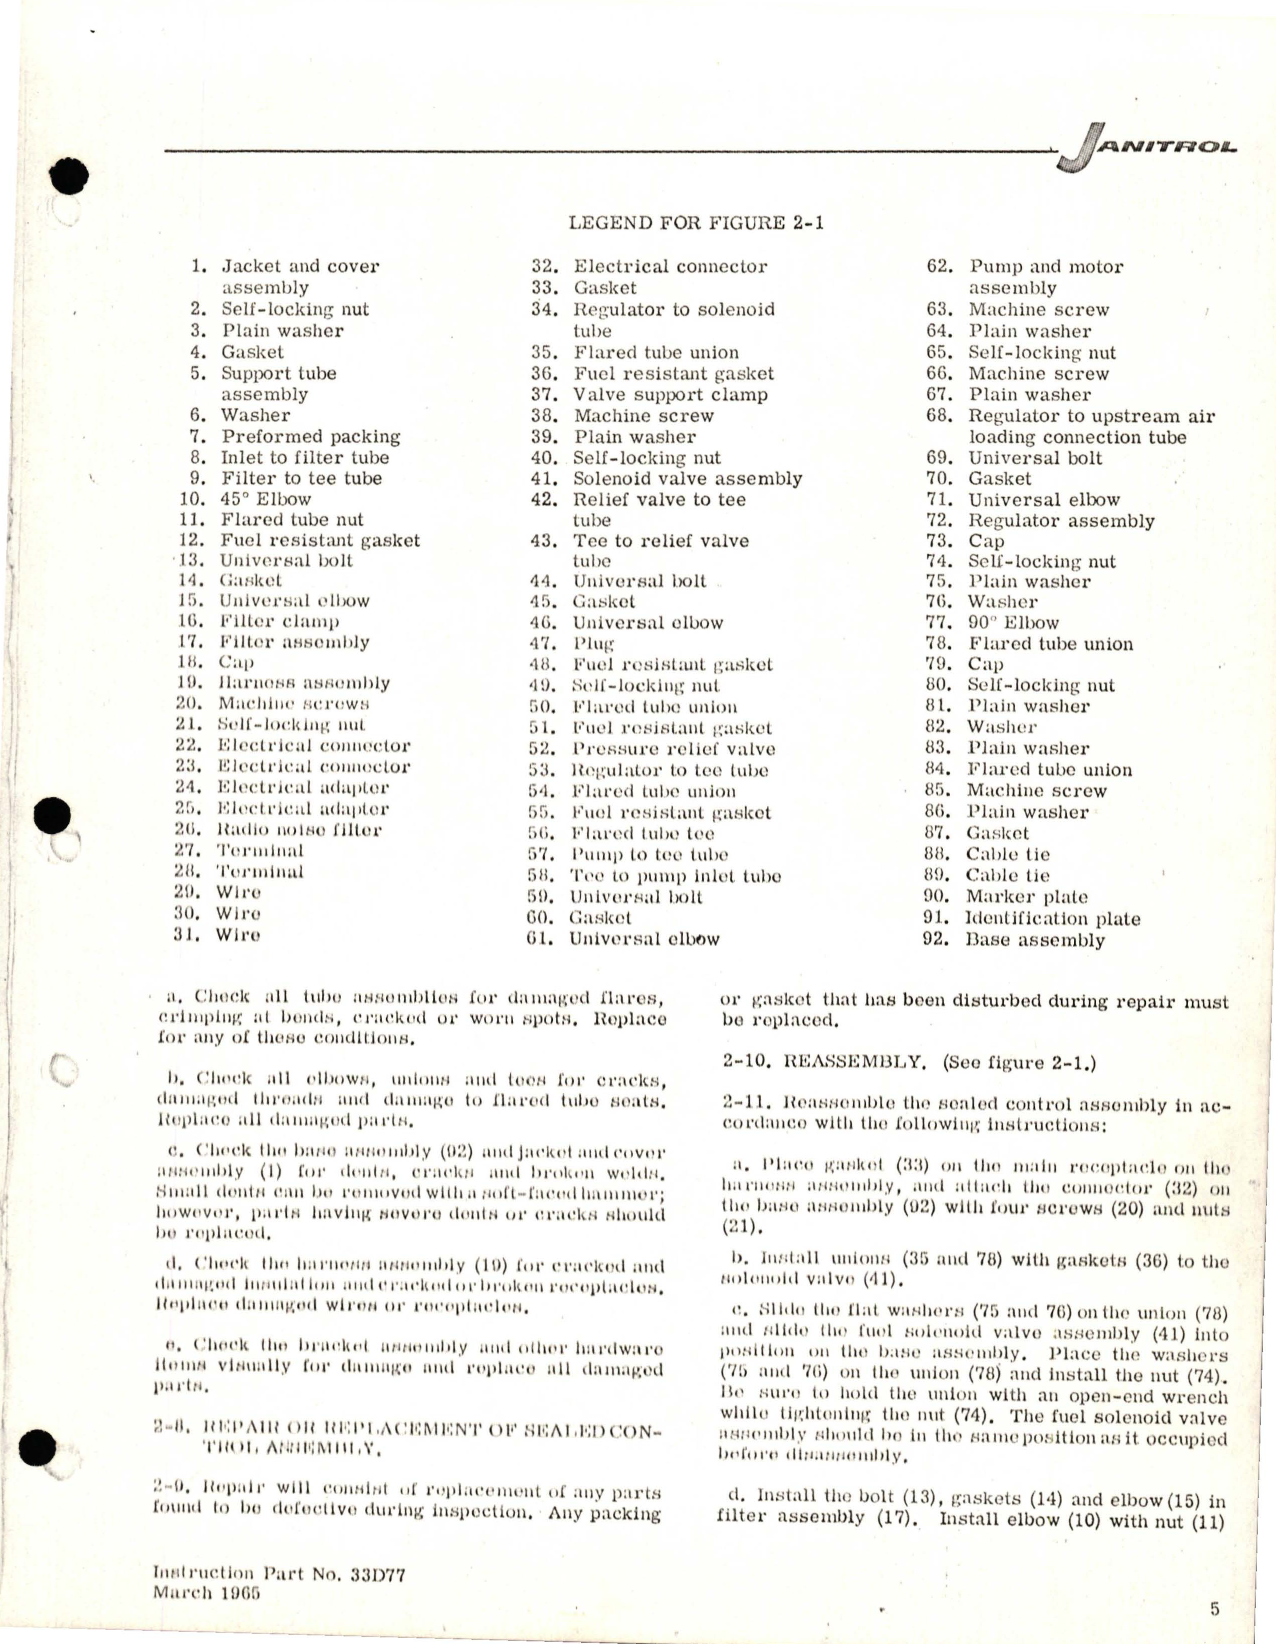 Sample page 5 from AirCorps Library document: Maintenance Instructions for Sealed Control Assembly - Part 32D50